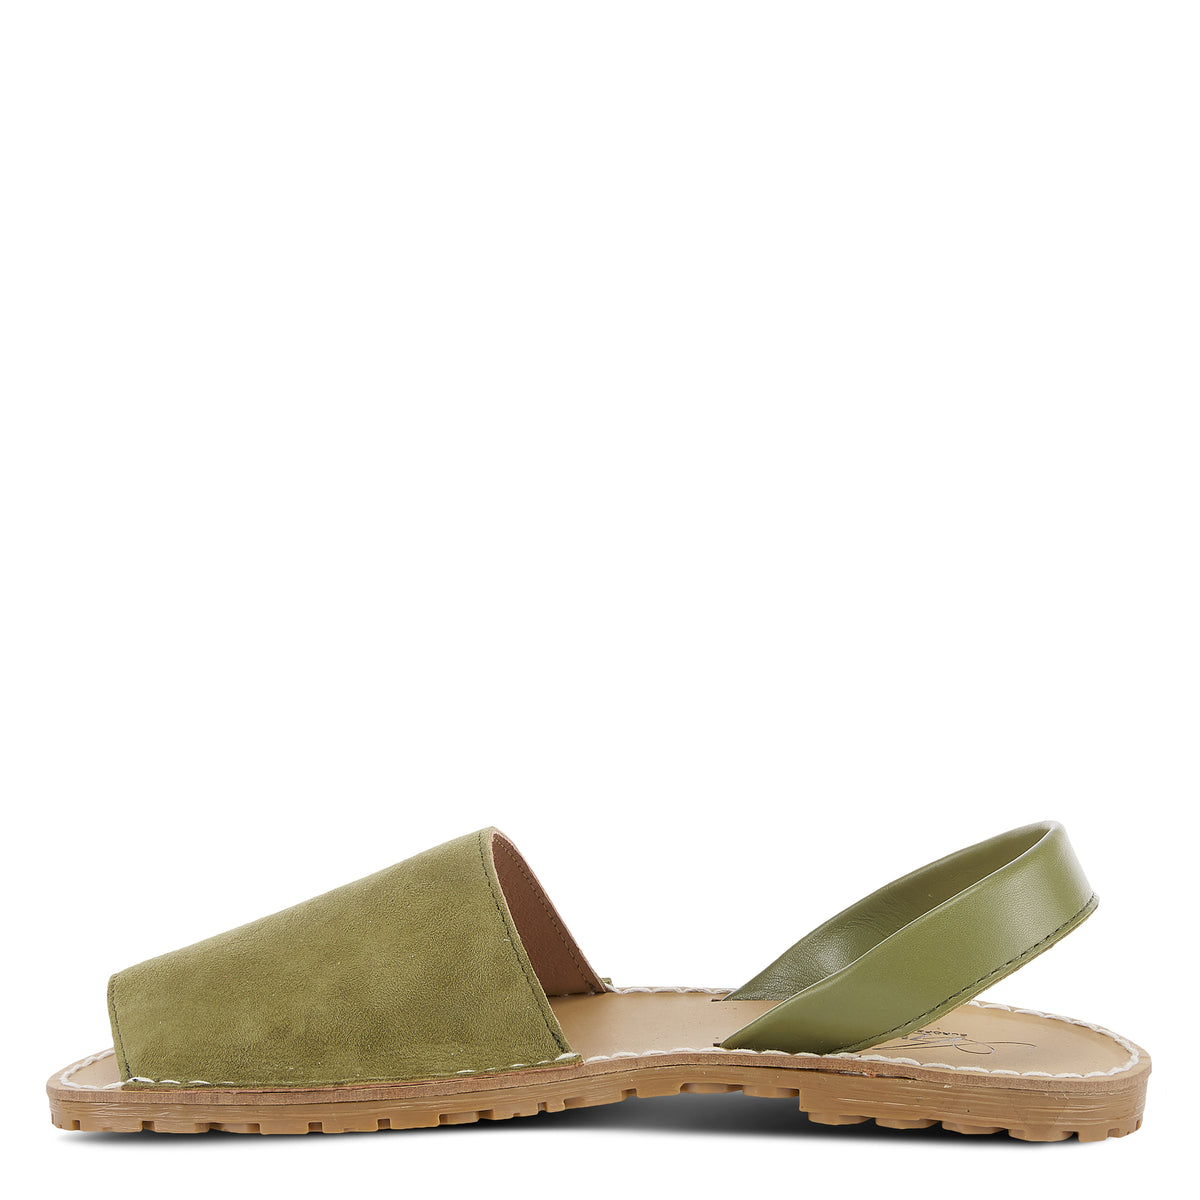 OLIVE SUEDE OPHELLIA SLINGBACK SANDAL by AZURA – Spring Step Shoes